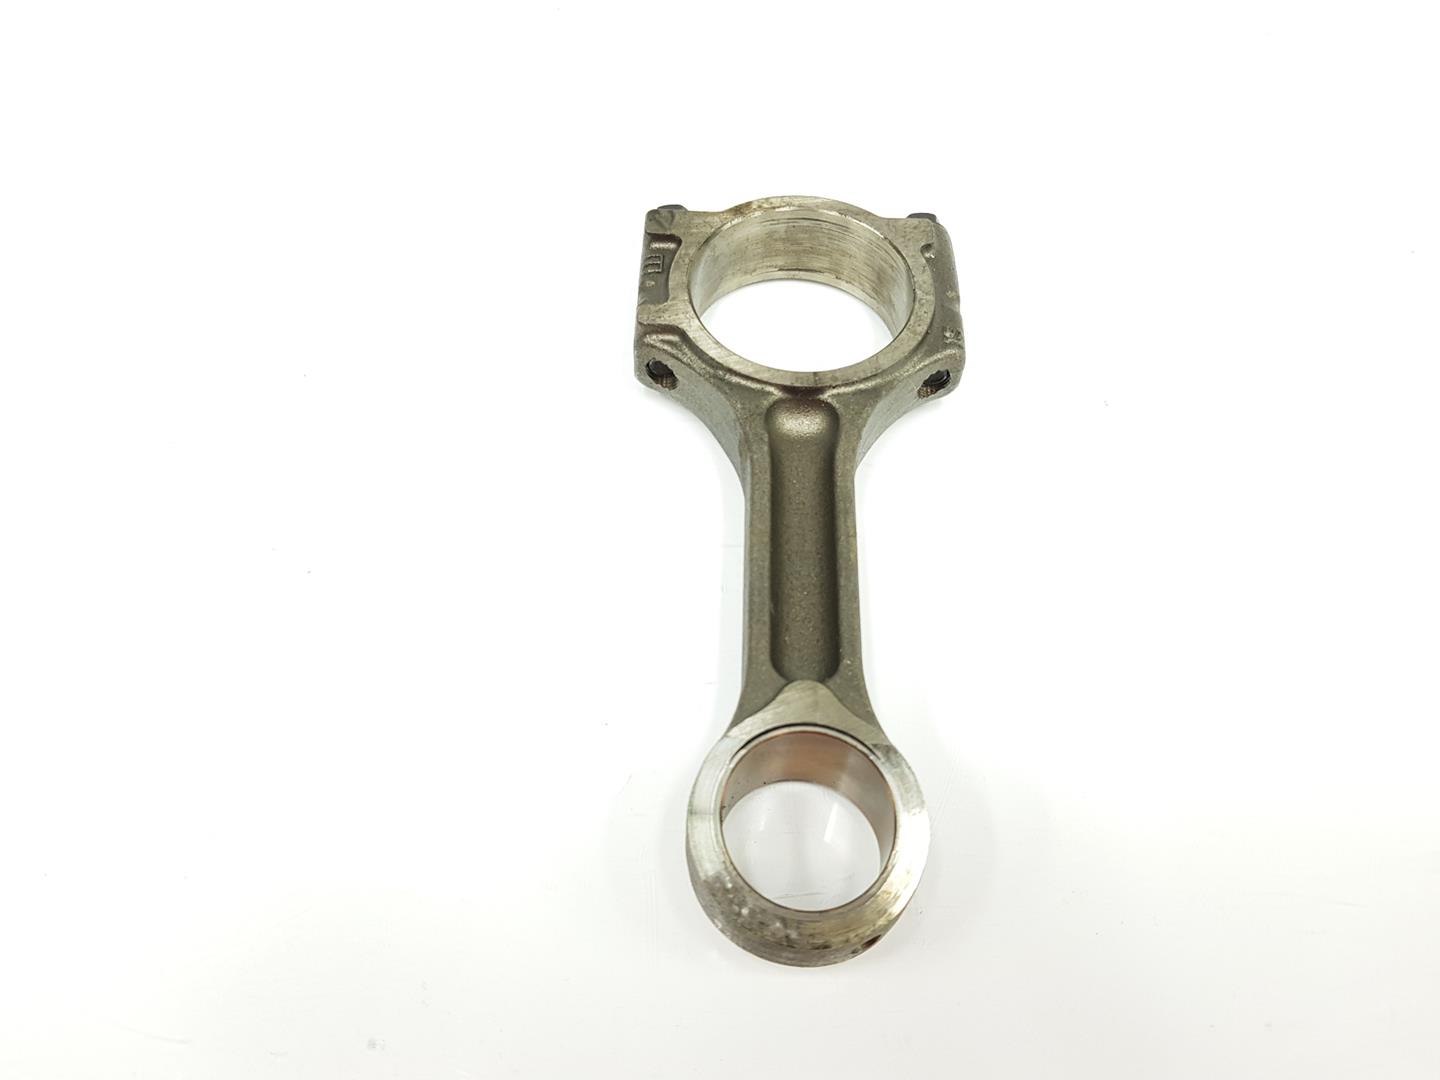 RENAULT Scenic 3 generation (2009-2015) Connecting Rod 121001039R, 121004759R, 1345HD 25061389